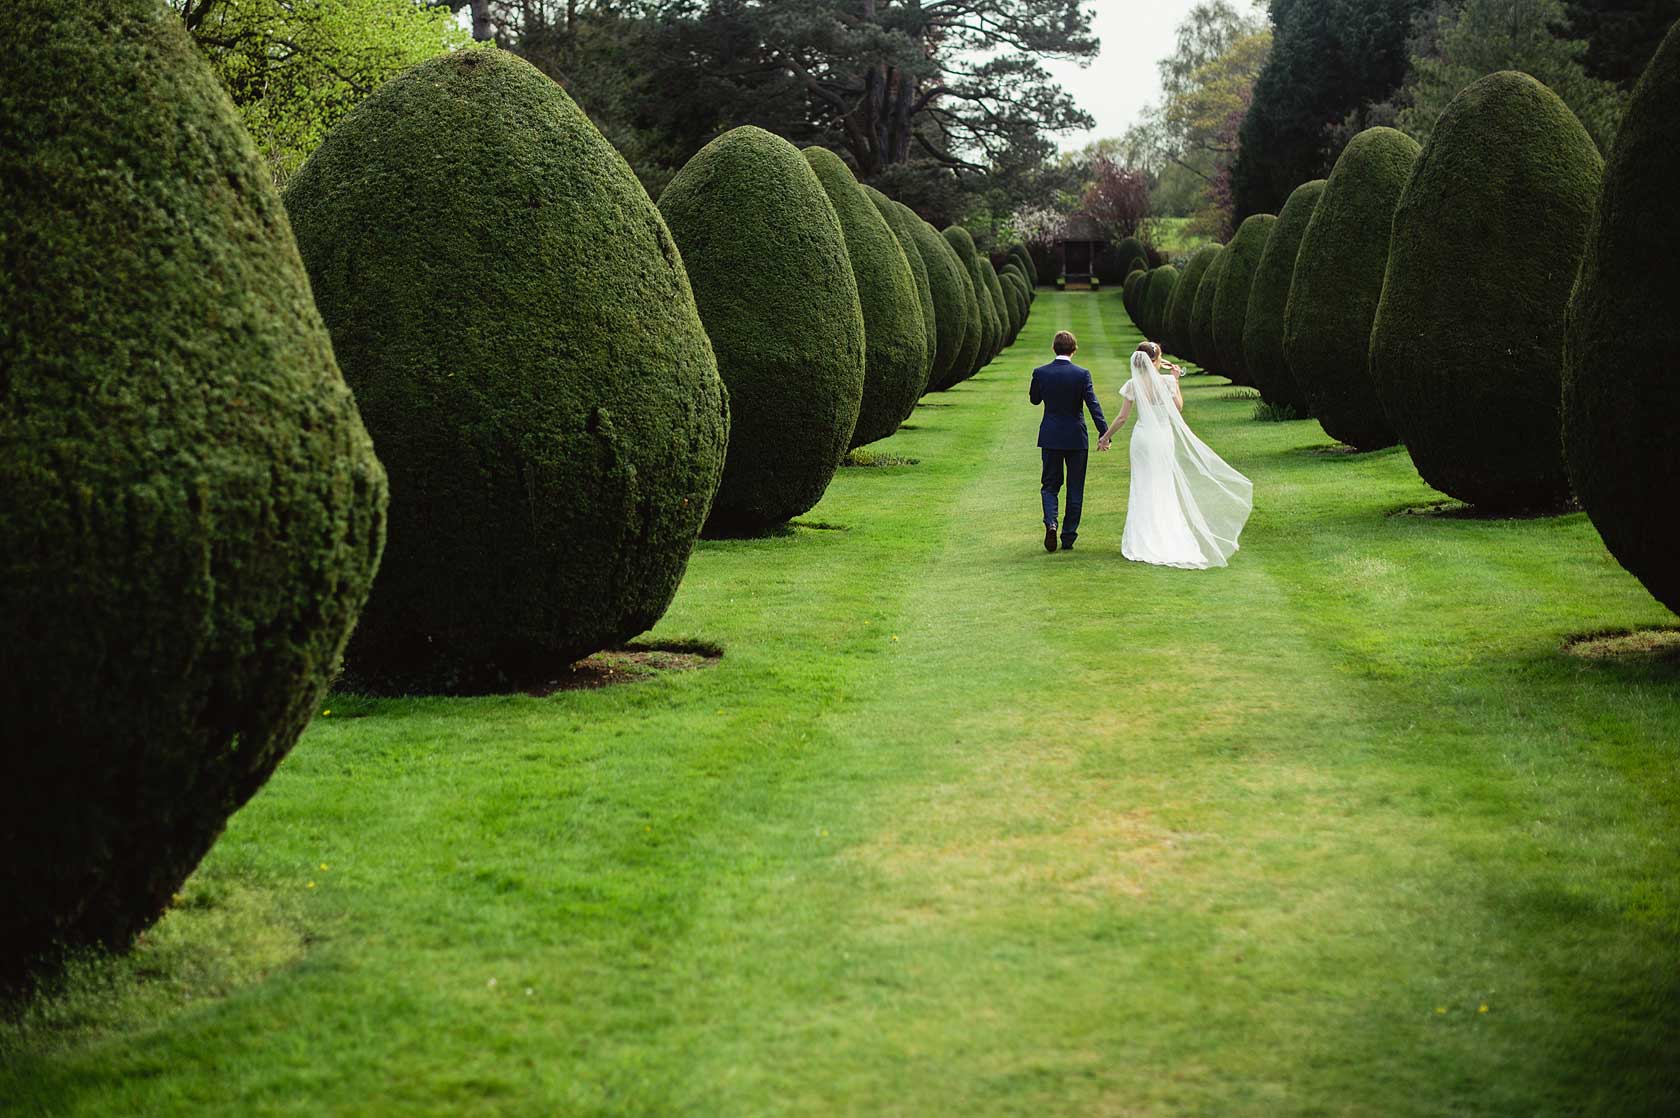 Reportage Wedding Photography at The Elvetham Hotel